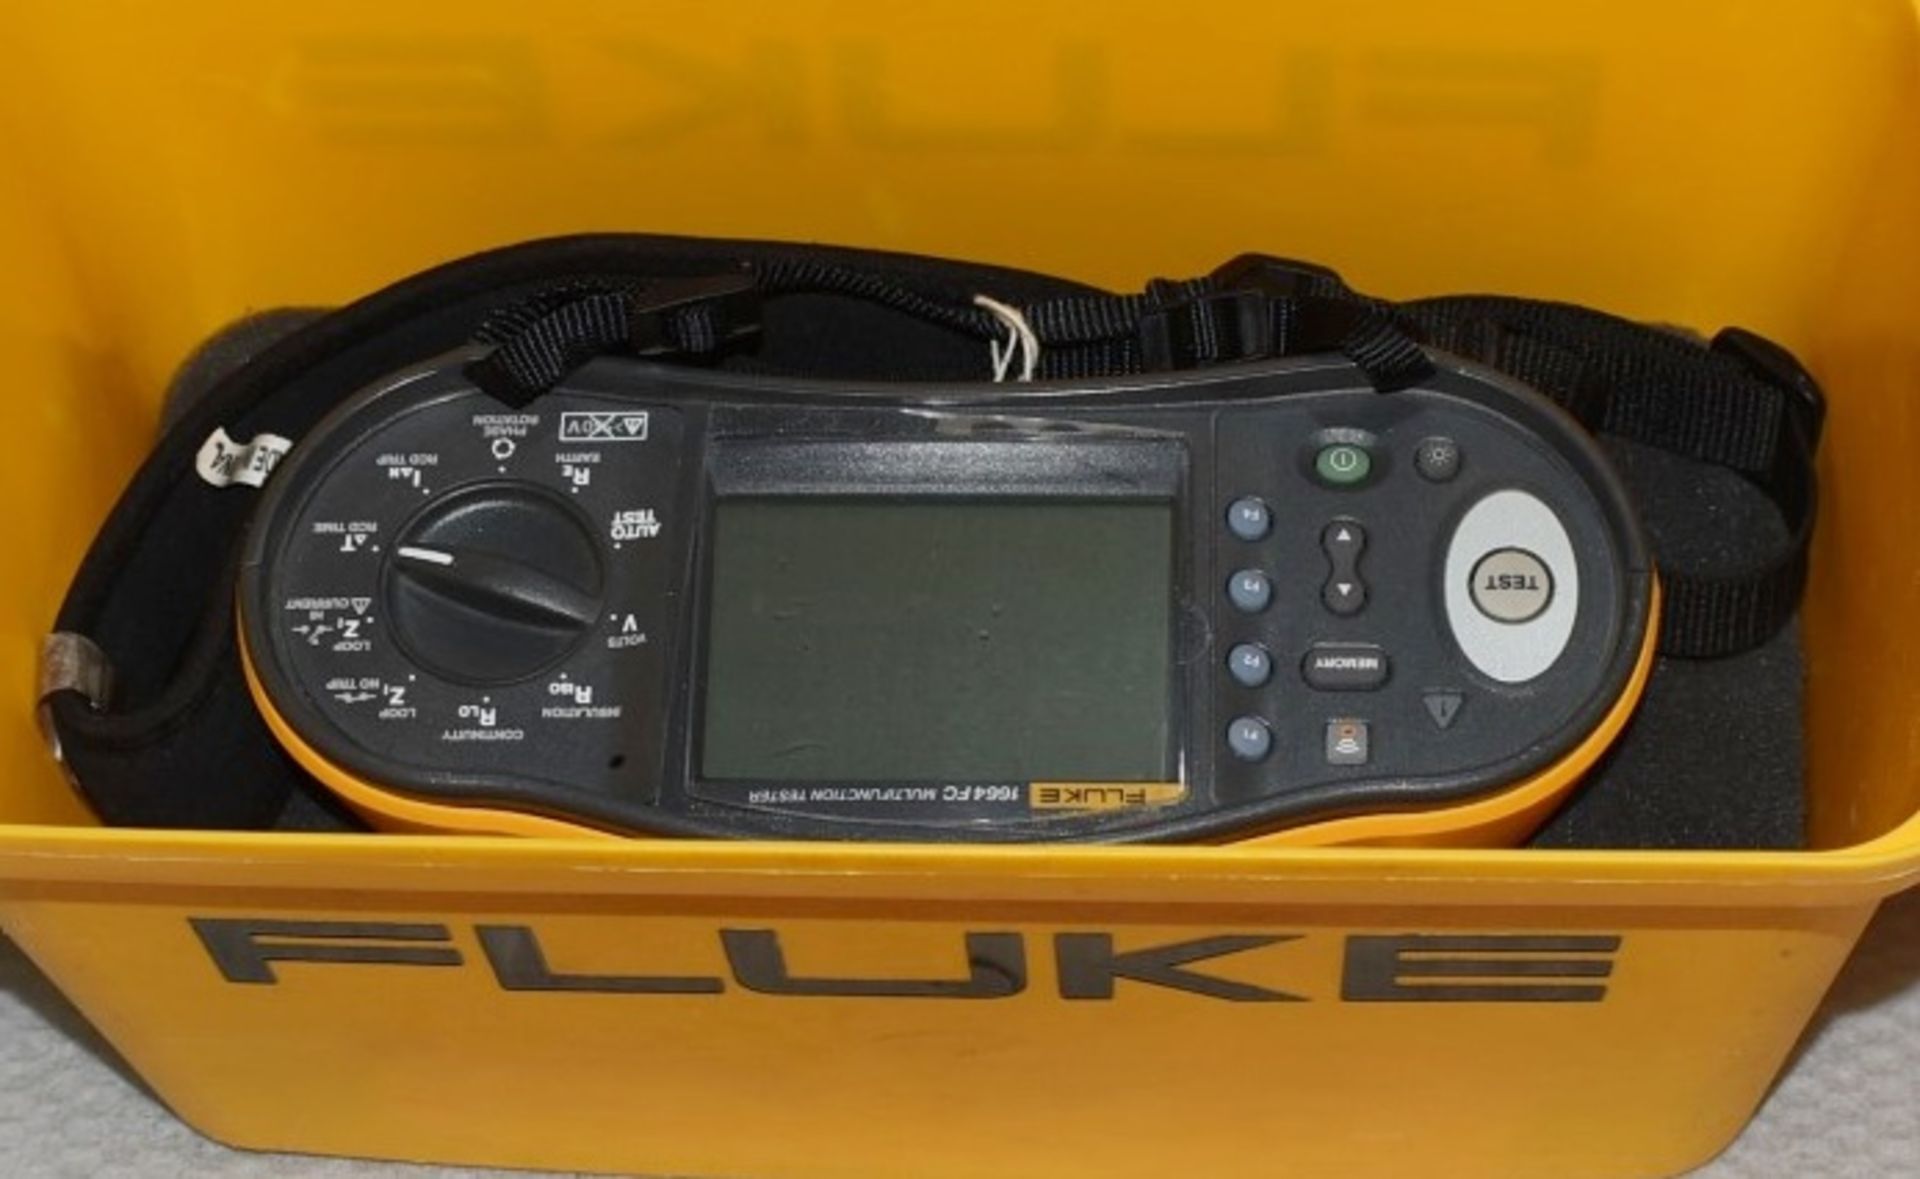 1 x FLUKE 1664 FC Multifunction Tester With Portable Hard Carry Case - Original RRP £959.00 - Ref: - Image 3 of 5